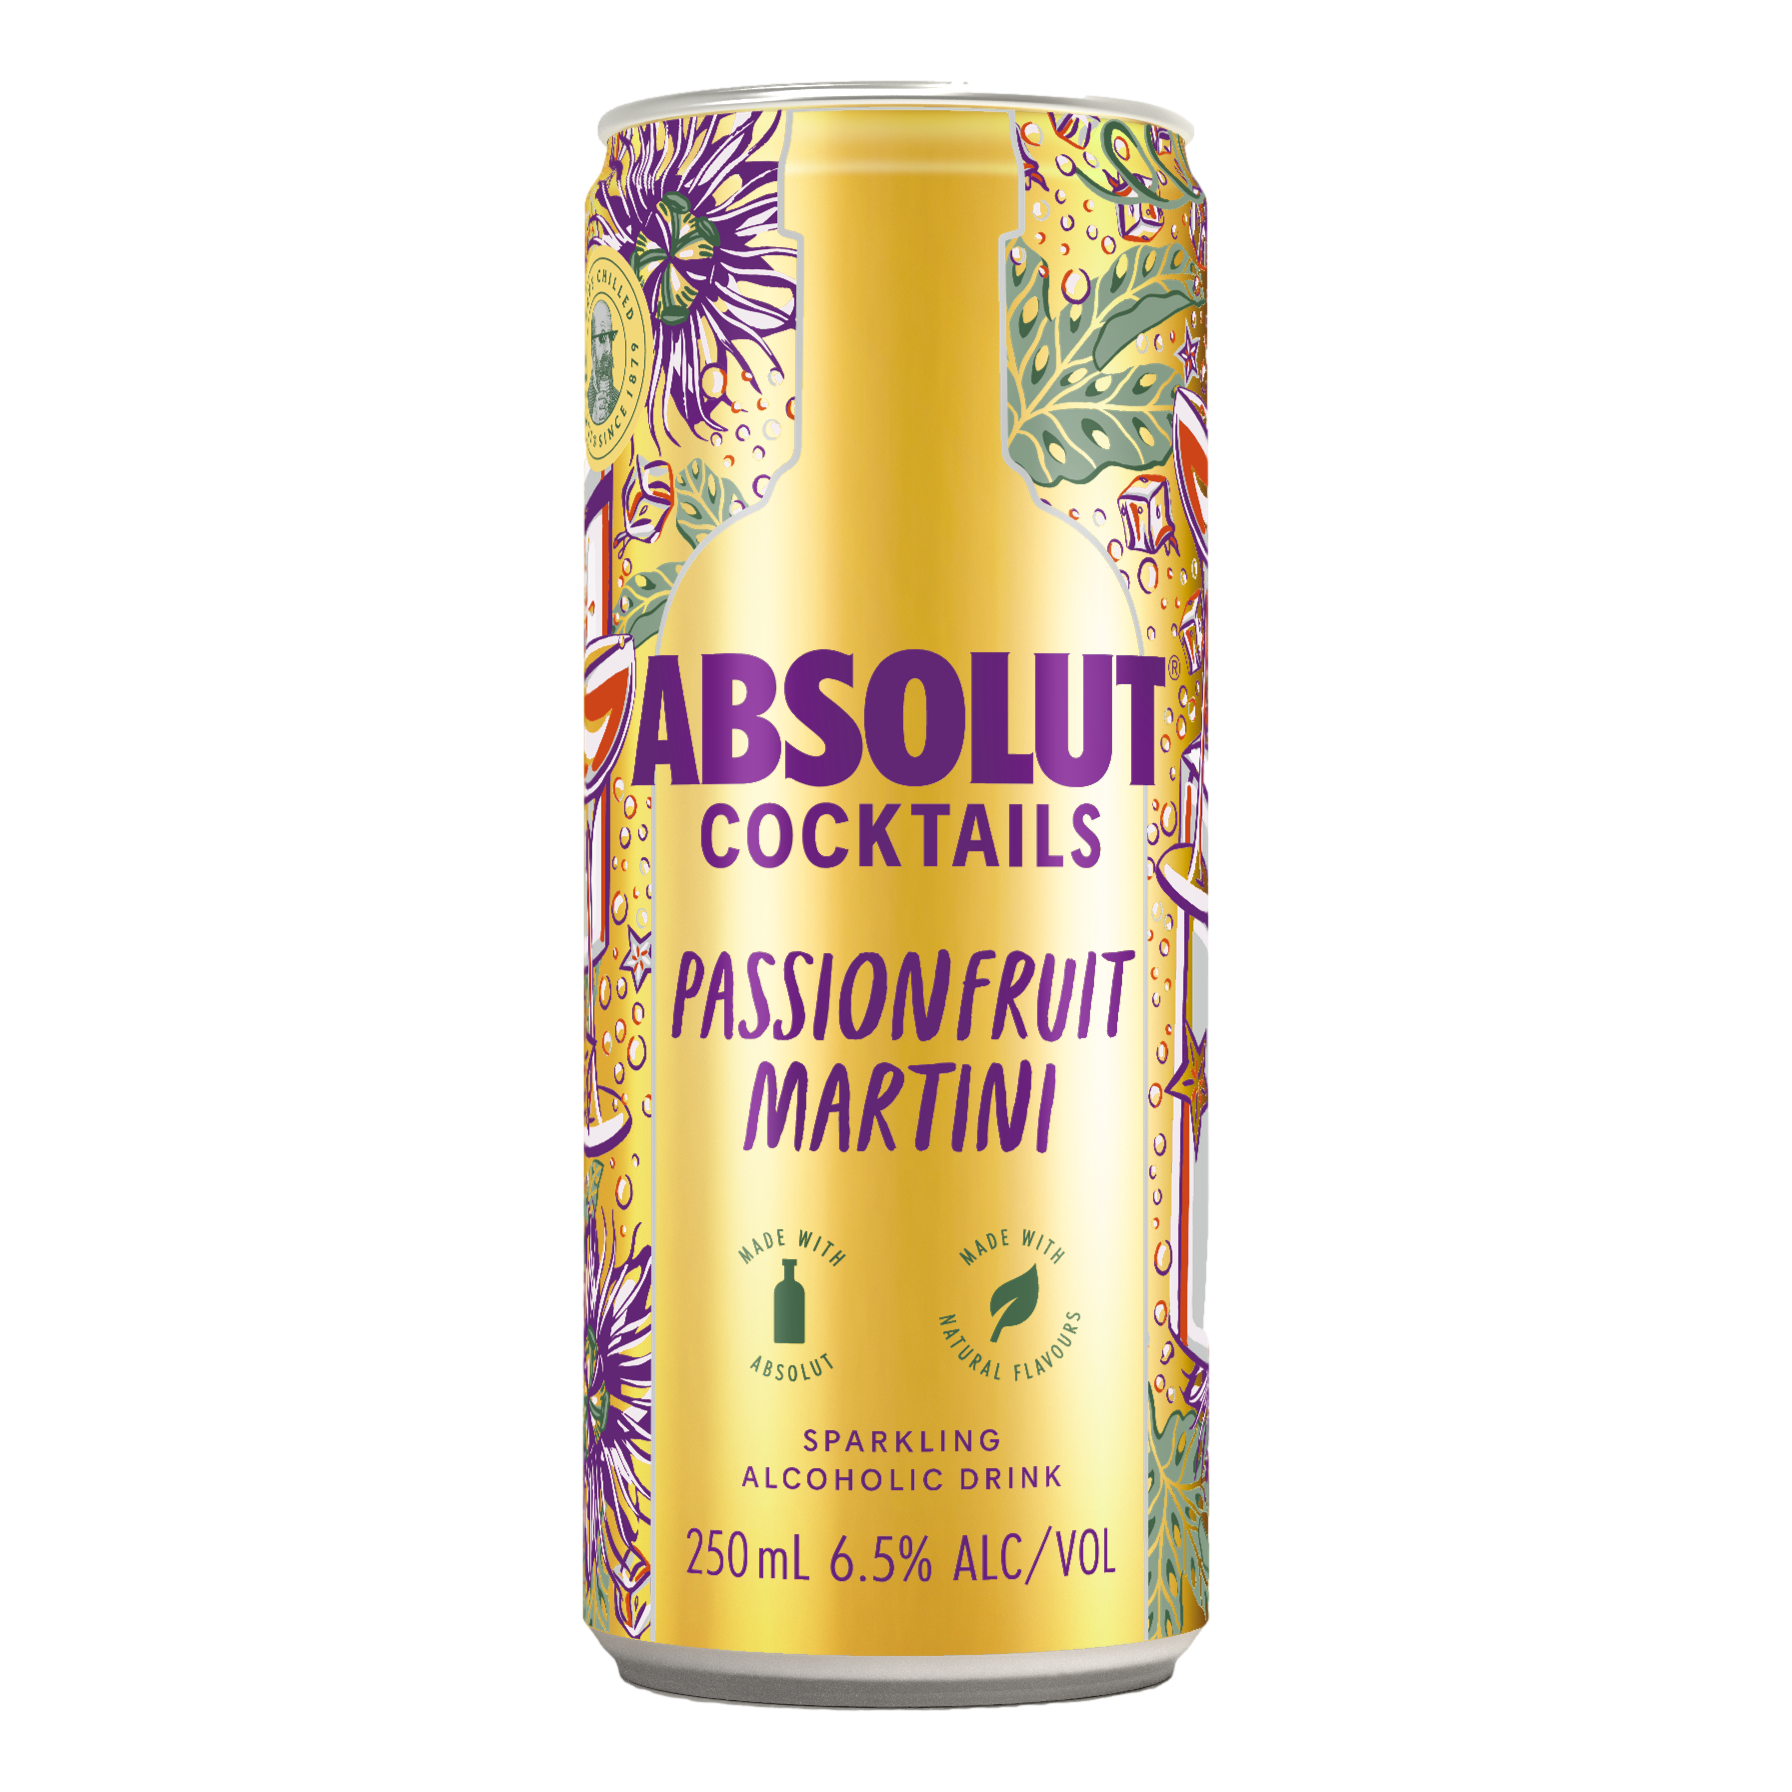 Absolut Cocktails Passionfruit Martini 6.5% 250ml Can Single